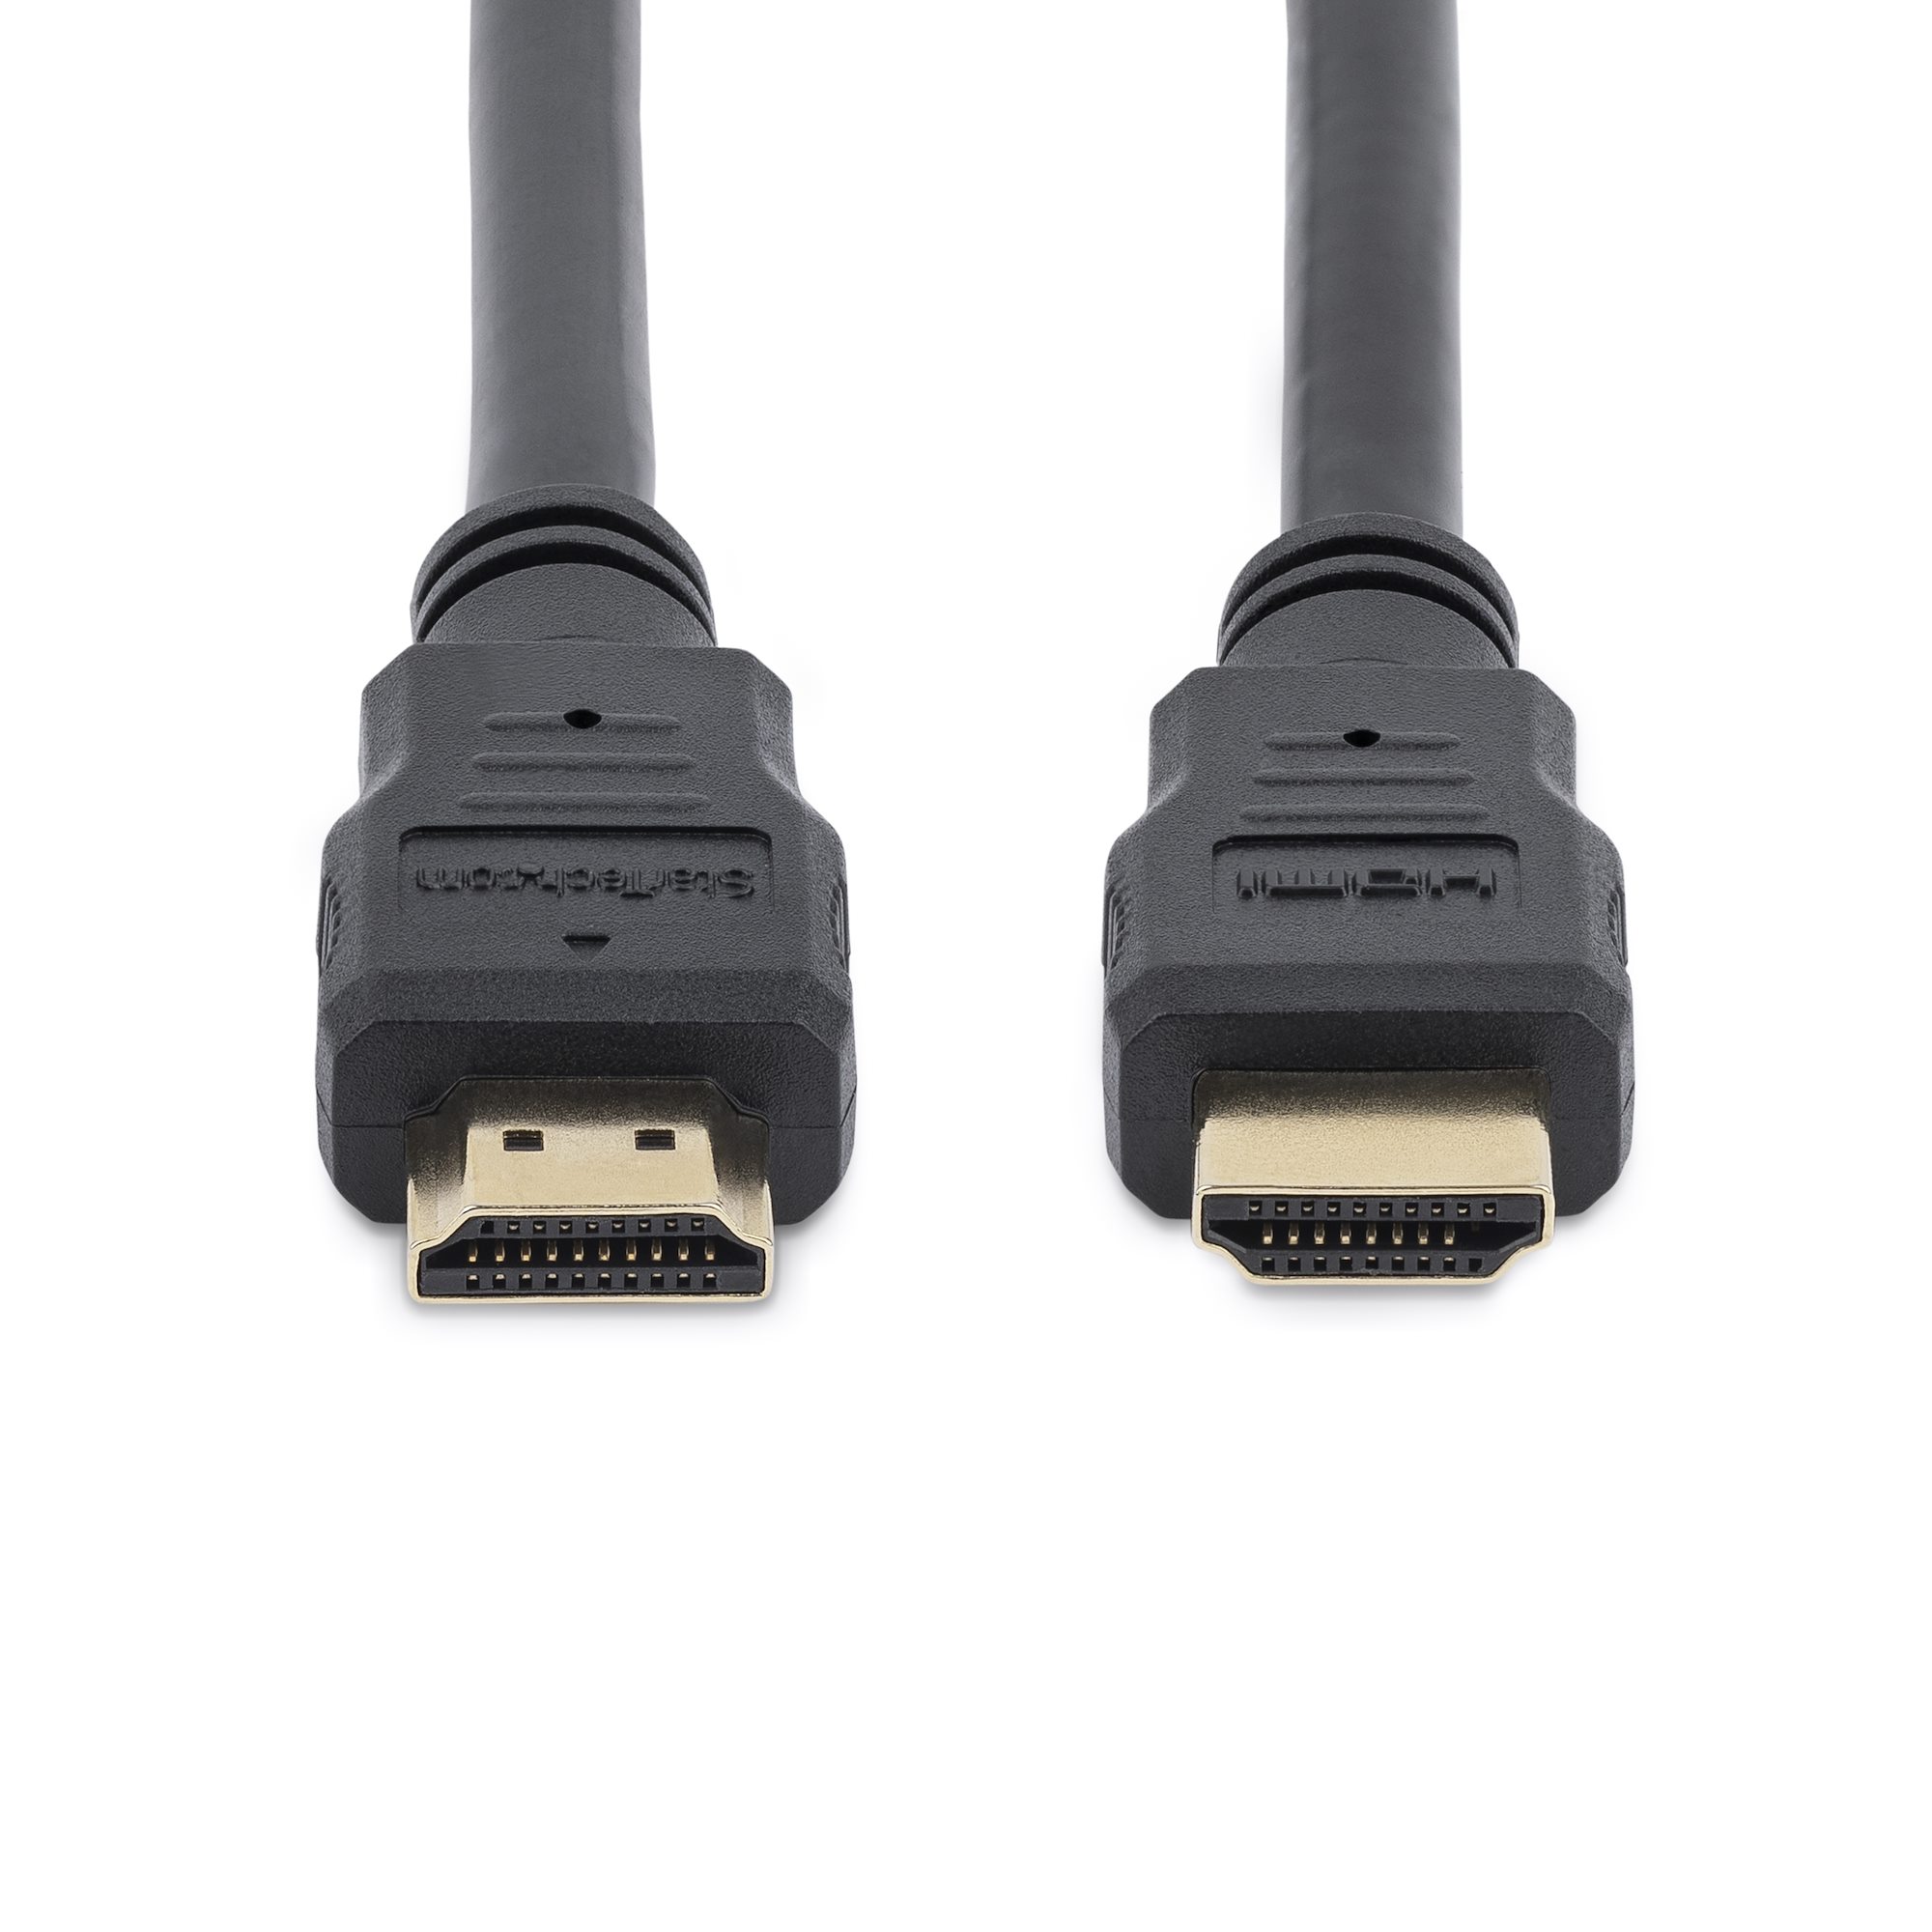 CBHD 06 VideoSecu 6 FT Hi Speed HDMI Cable V1.4 40 CABLES GREAT PRICE 